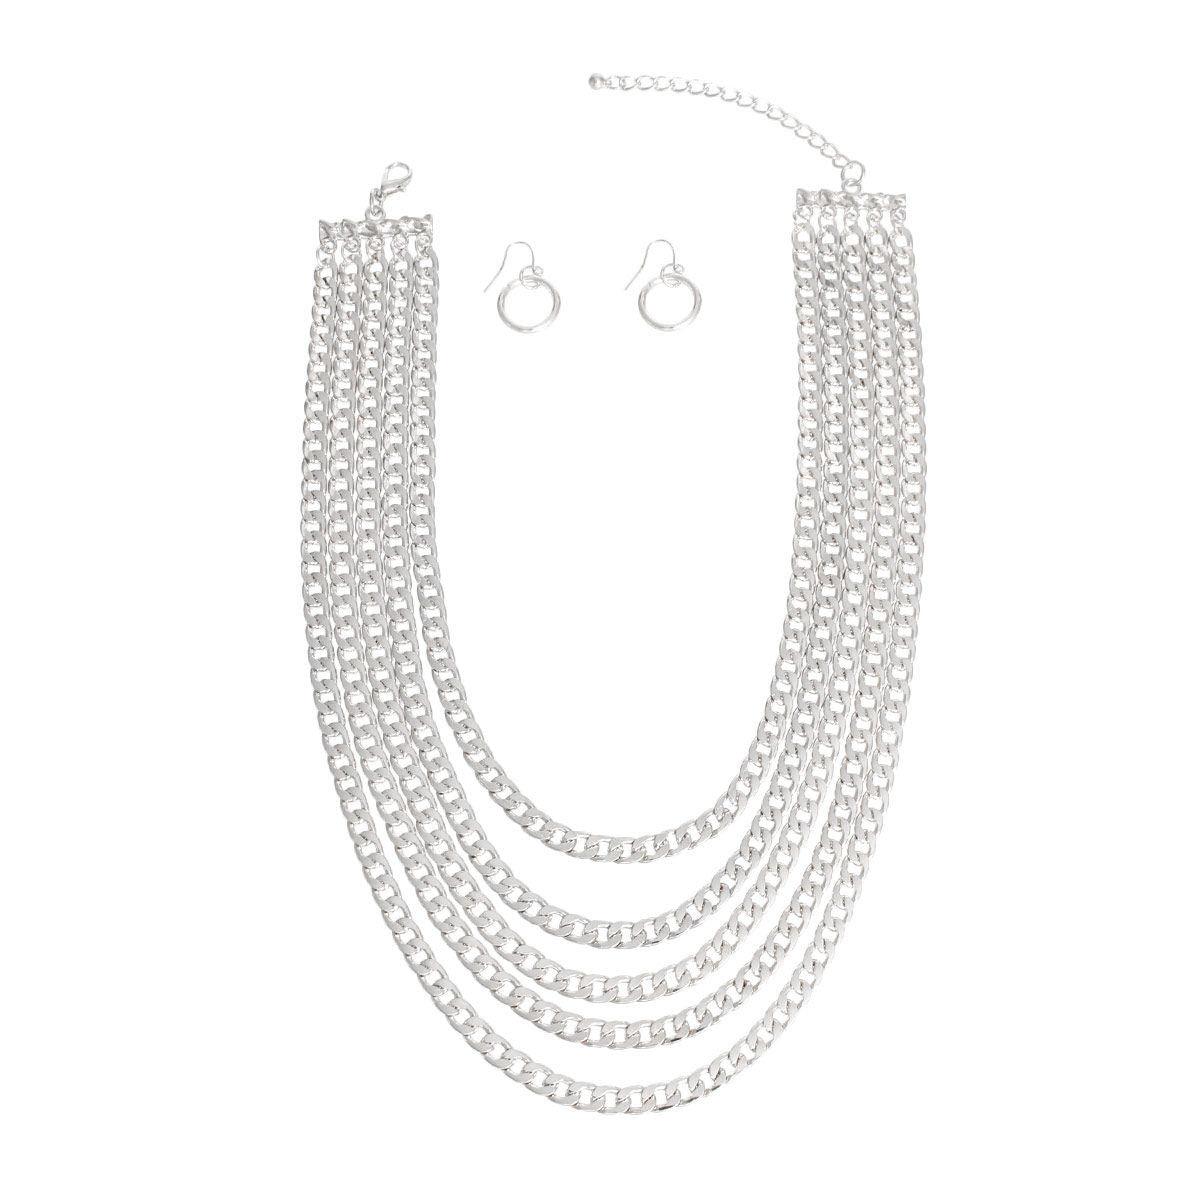 Make a Statement: Stunning Chain Necklace Silver Curb Layered and Earrings | Fashion Jewelry Set